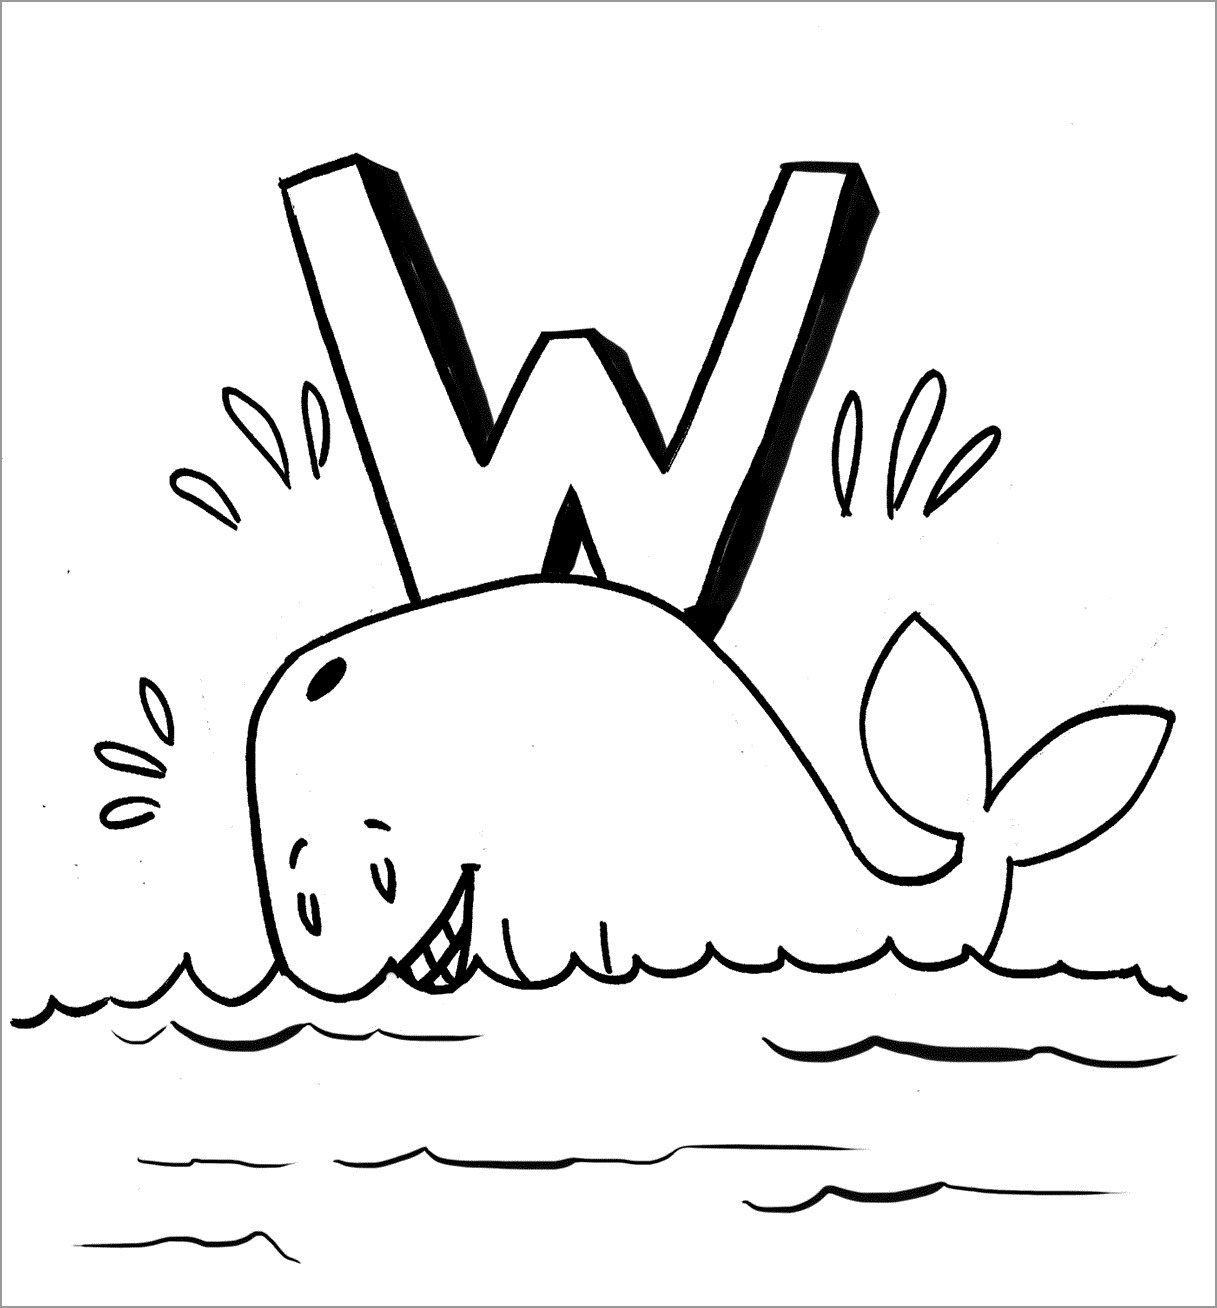 Printable Whale Coloring Page for Kids